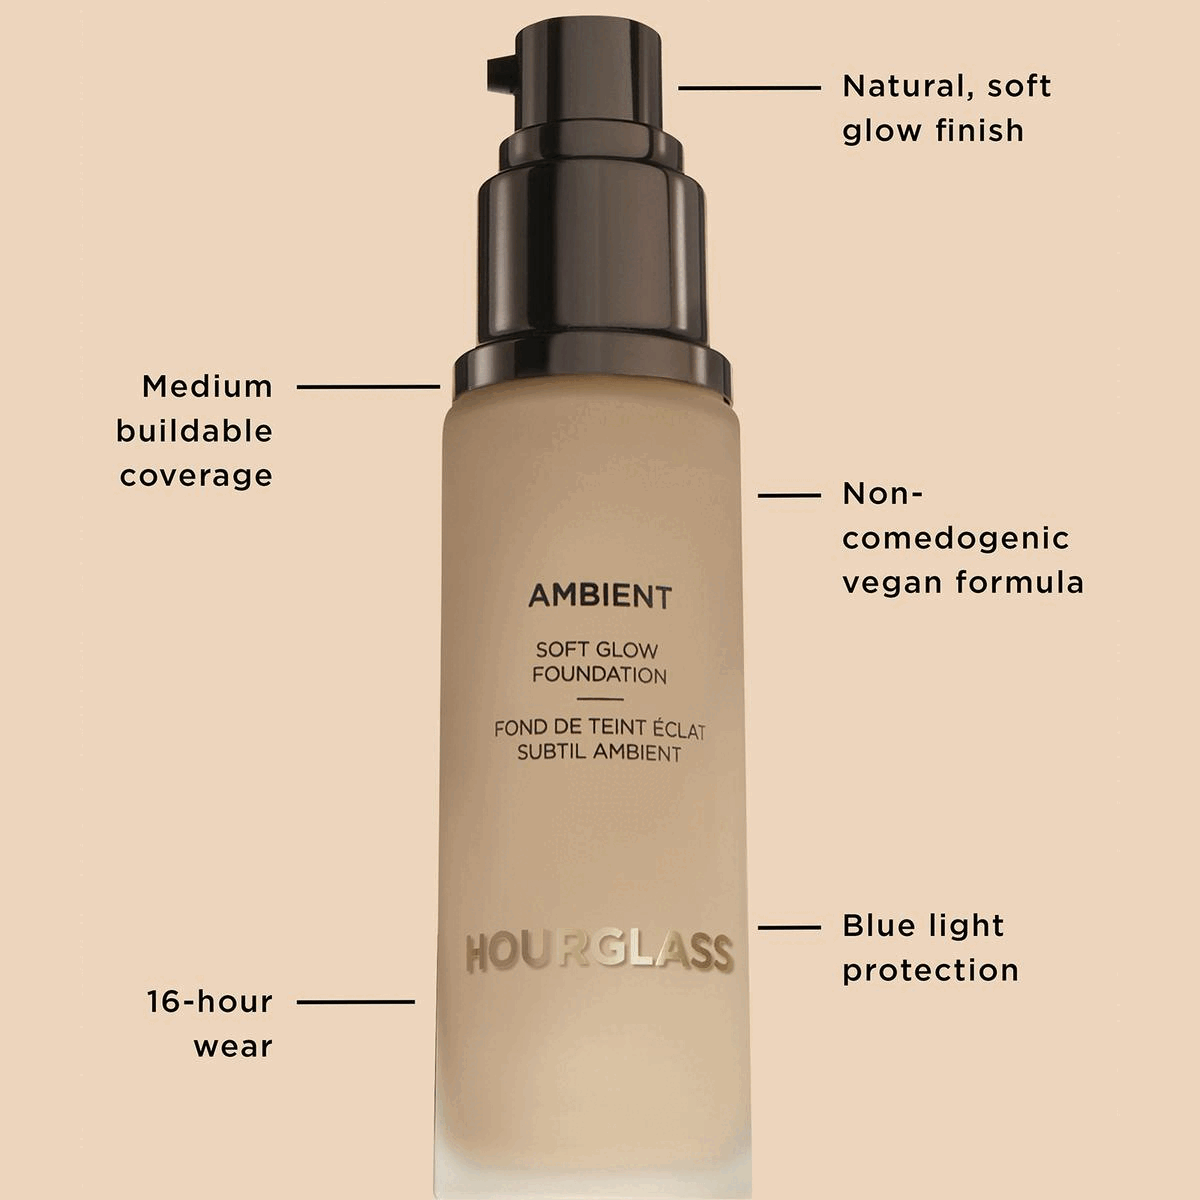 Image 1, Natural soft glow finish, medium buildable coverage, non-comedogenic vegan formula, 16-hour wear, blue light protection Image 2, Deep shades- 14 deep warm, 14.5 deep neutral, 15 deep cool, 15.5 deep neutral, 16 deep warm, 16.5 very deep neutral, 17 very deep warm, 17.5 deepest cool Image 3, Light medium shades, 5 light neutral, 5.5 light warm, 6 light medium warm, 6.5 light medium neutral, 7 light medium warm, 7.5 light medium neutral, 8 light medium neutral, 9 medium warm Image 4, Medium deep shades, 9.5 medium cool, 10 medium warm, 10.5 medium neutral, 11 medium neutral, 11.5 medium deep warm, 12 medium deep neutral, 13 medium deep warm, 13.5 medium deep neutral Image 5, light shades, 1 fairest cool, 1.5 very fair cool, 2 very fair warm, 2.5 fair cool, 3 fair neutral, 3.5 fair warm, 4 light warm, 4.5 light cool